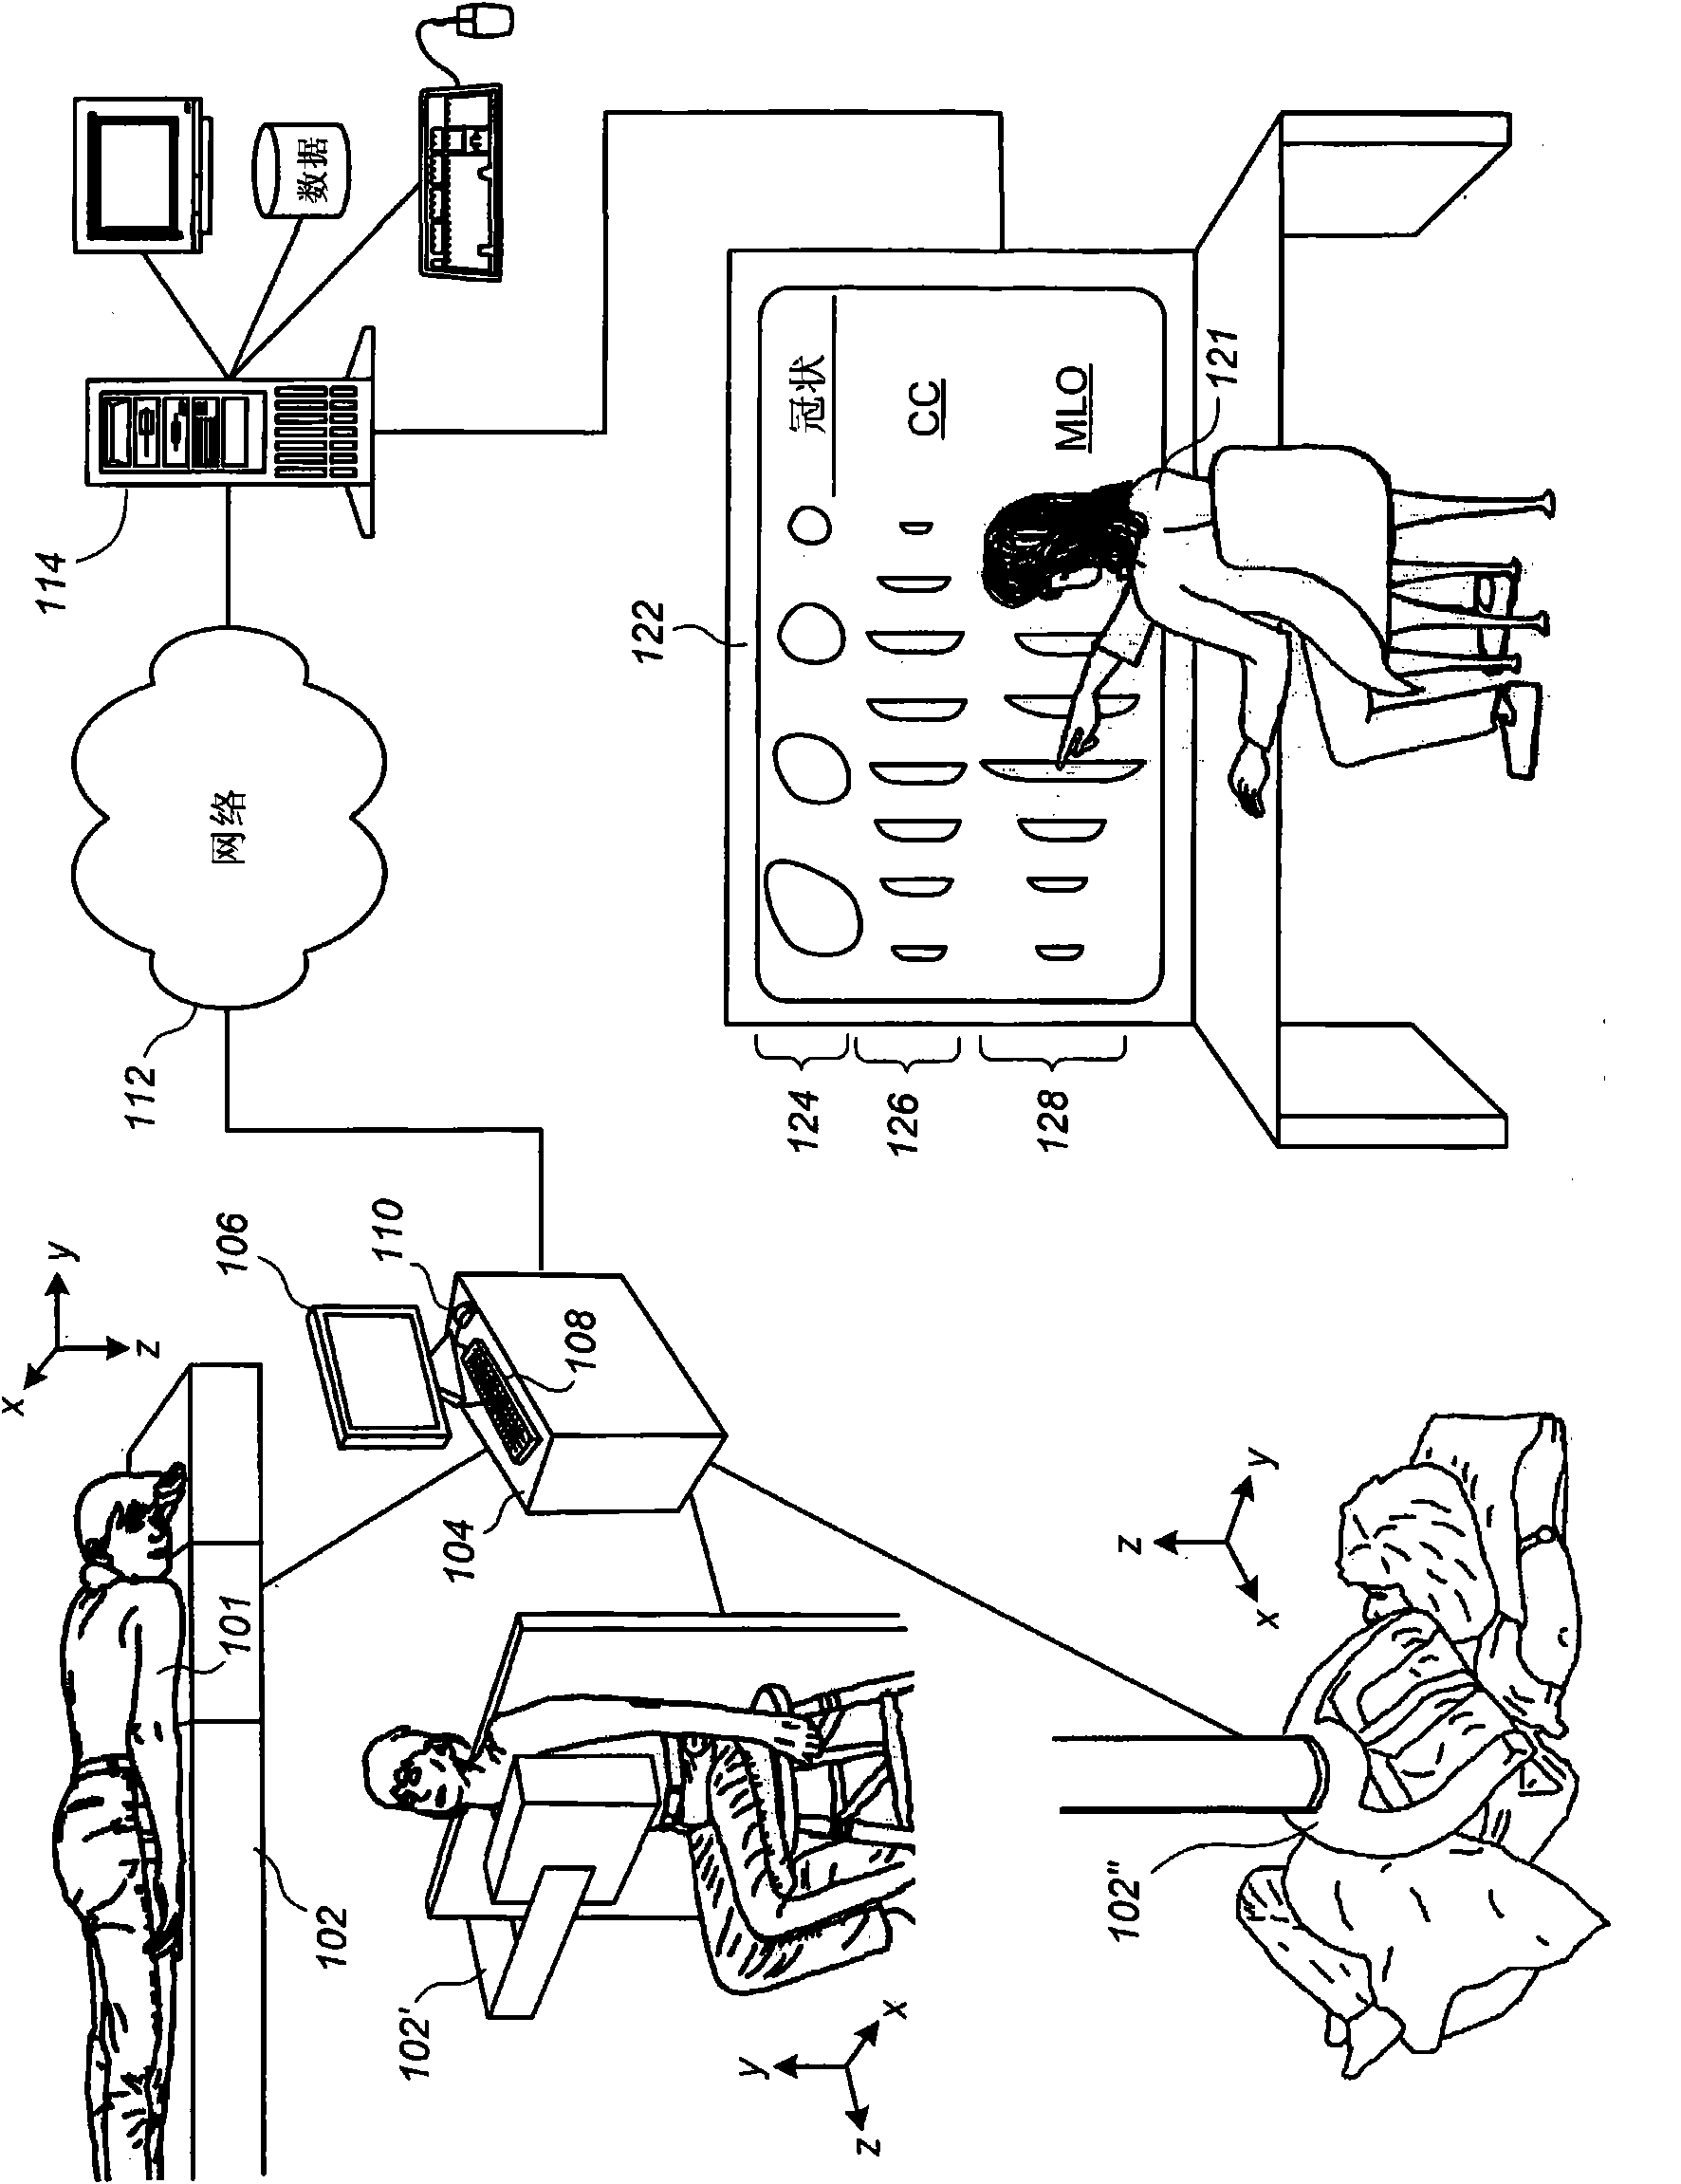 Device for displaying breast ultrasound information